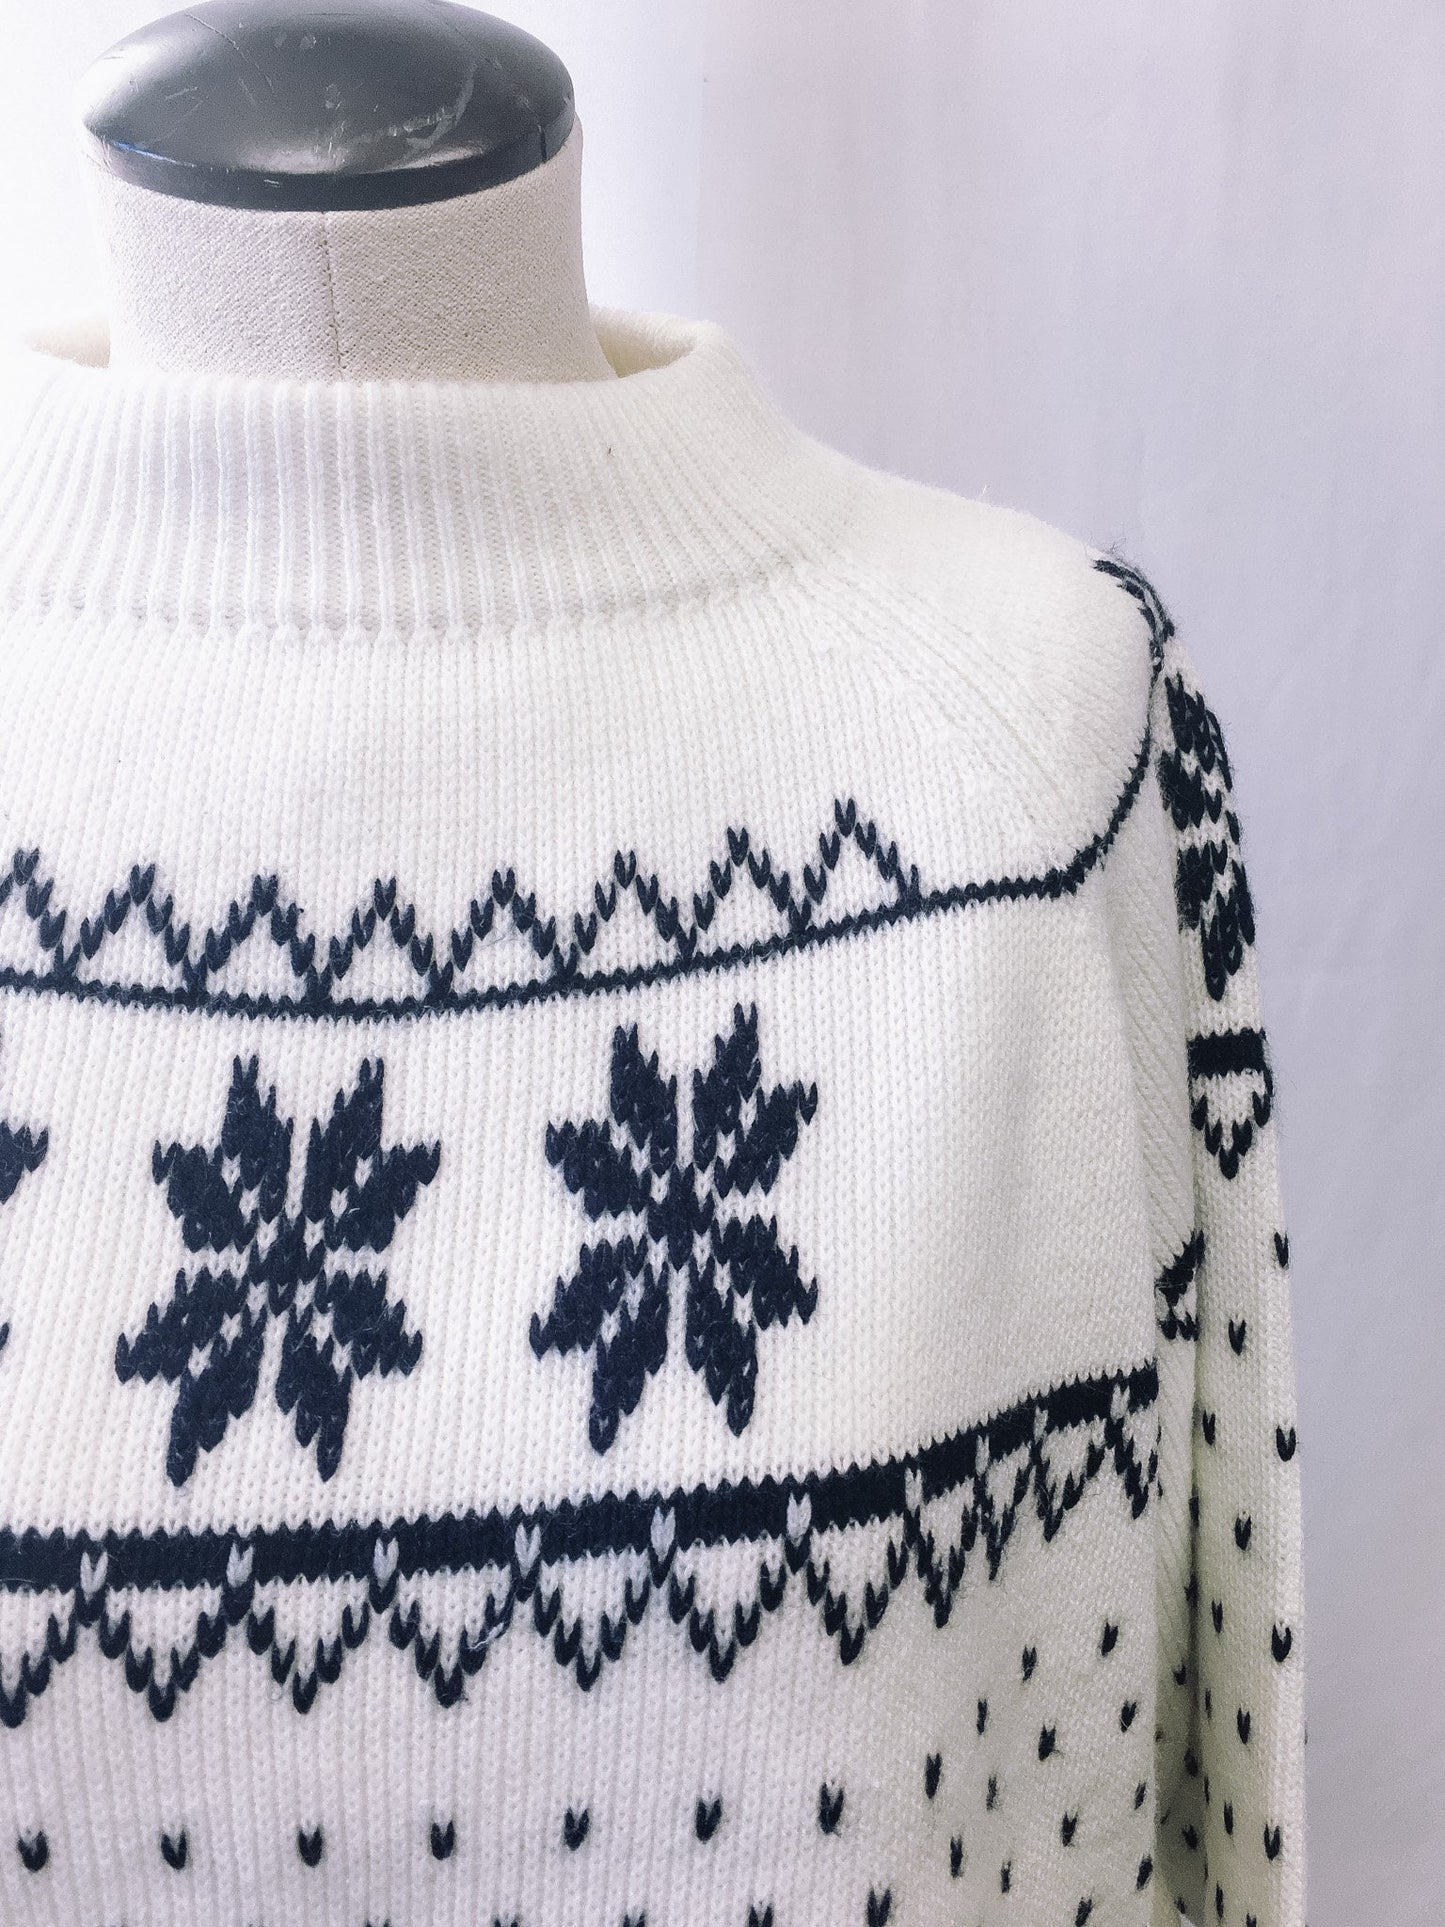 Vintage 70s JCPenney White Snowflakes Fair Isle Knit Sweater, 1970s Winter Pullover Crewneck Sweater, Sz. XL